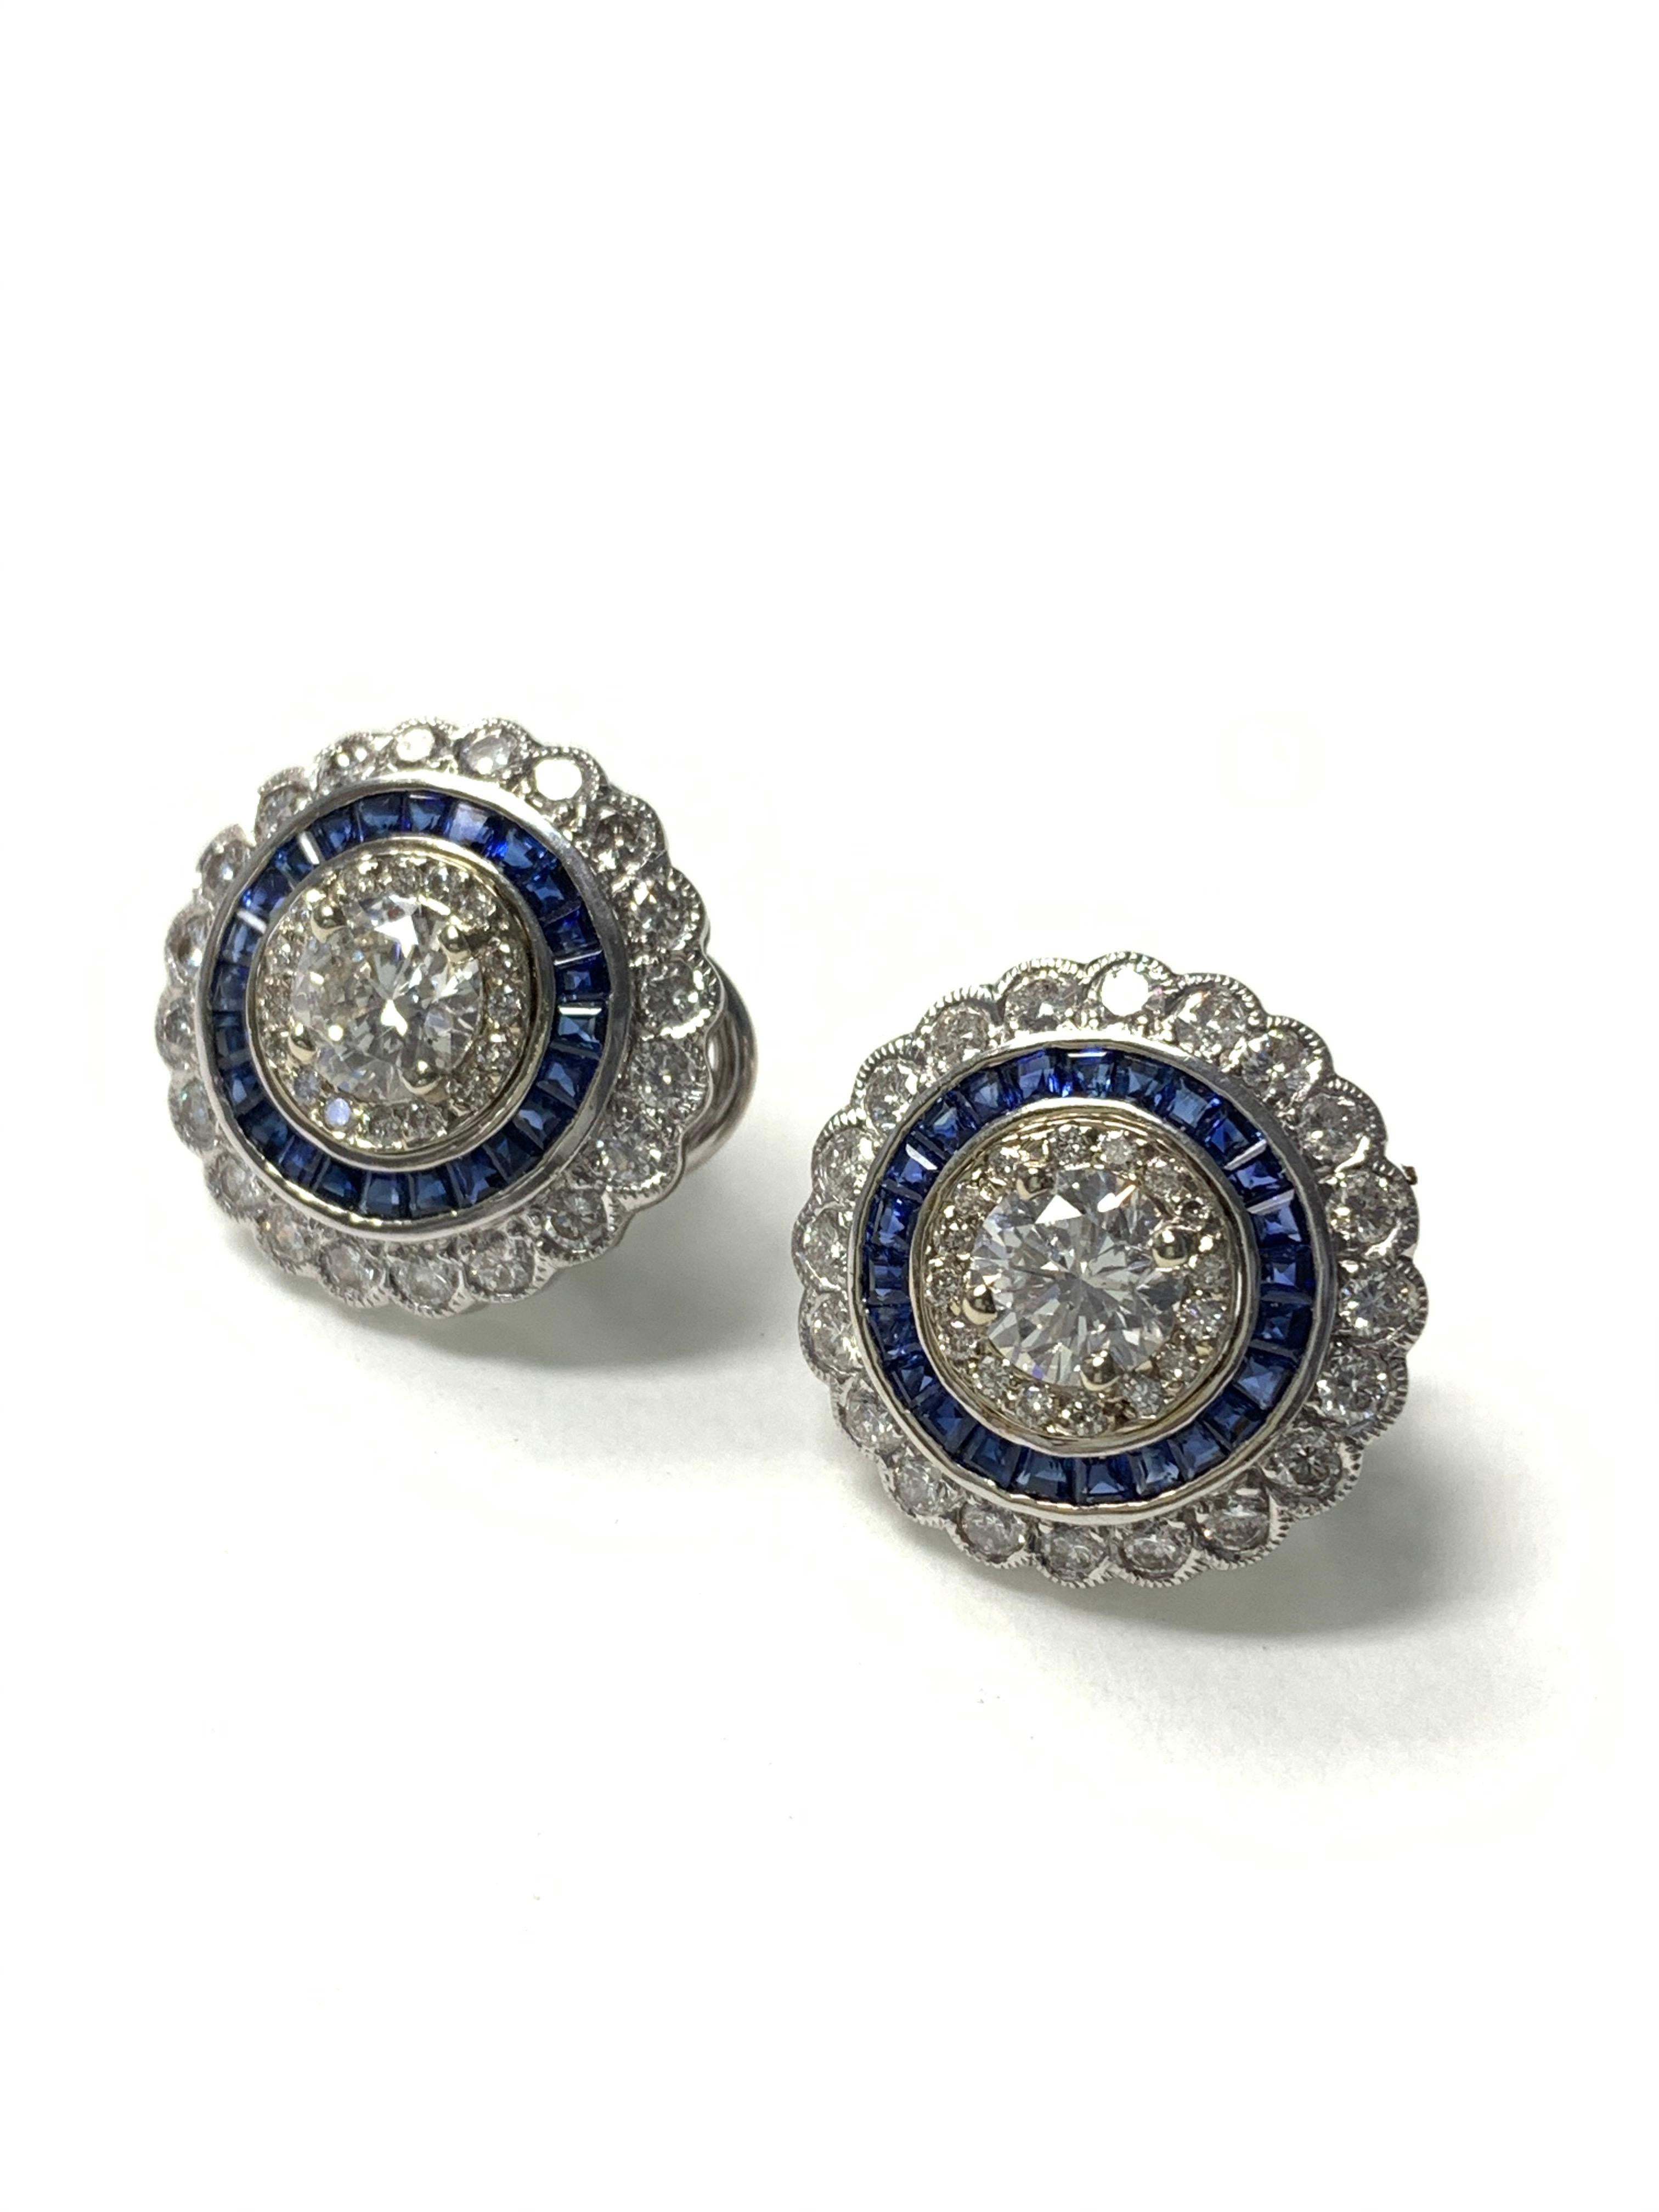 White Old European Cut Diamond and Blue Sapphire Stud Earrings in 18 Karat Gold For Sale 14